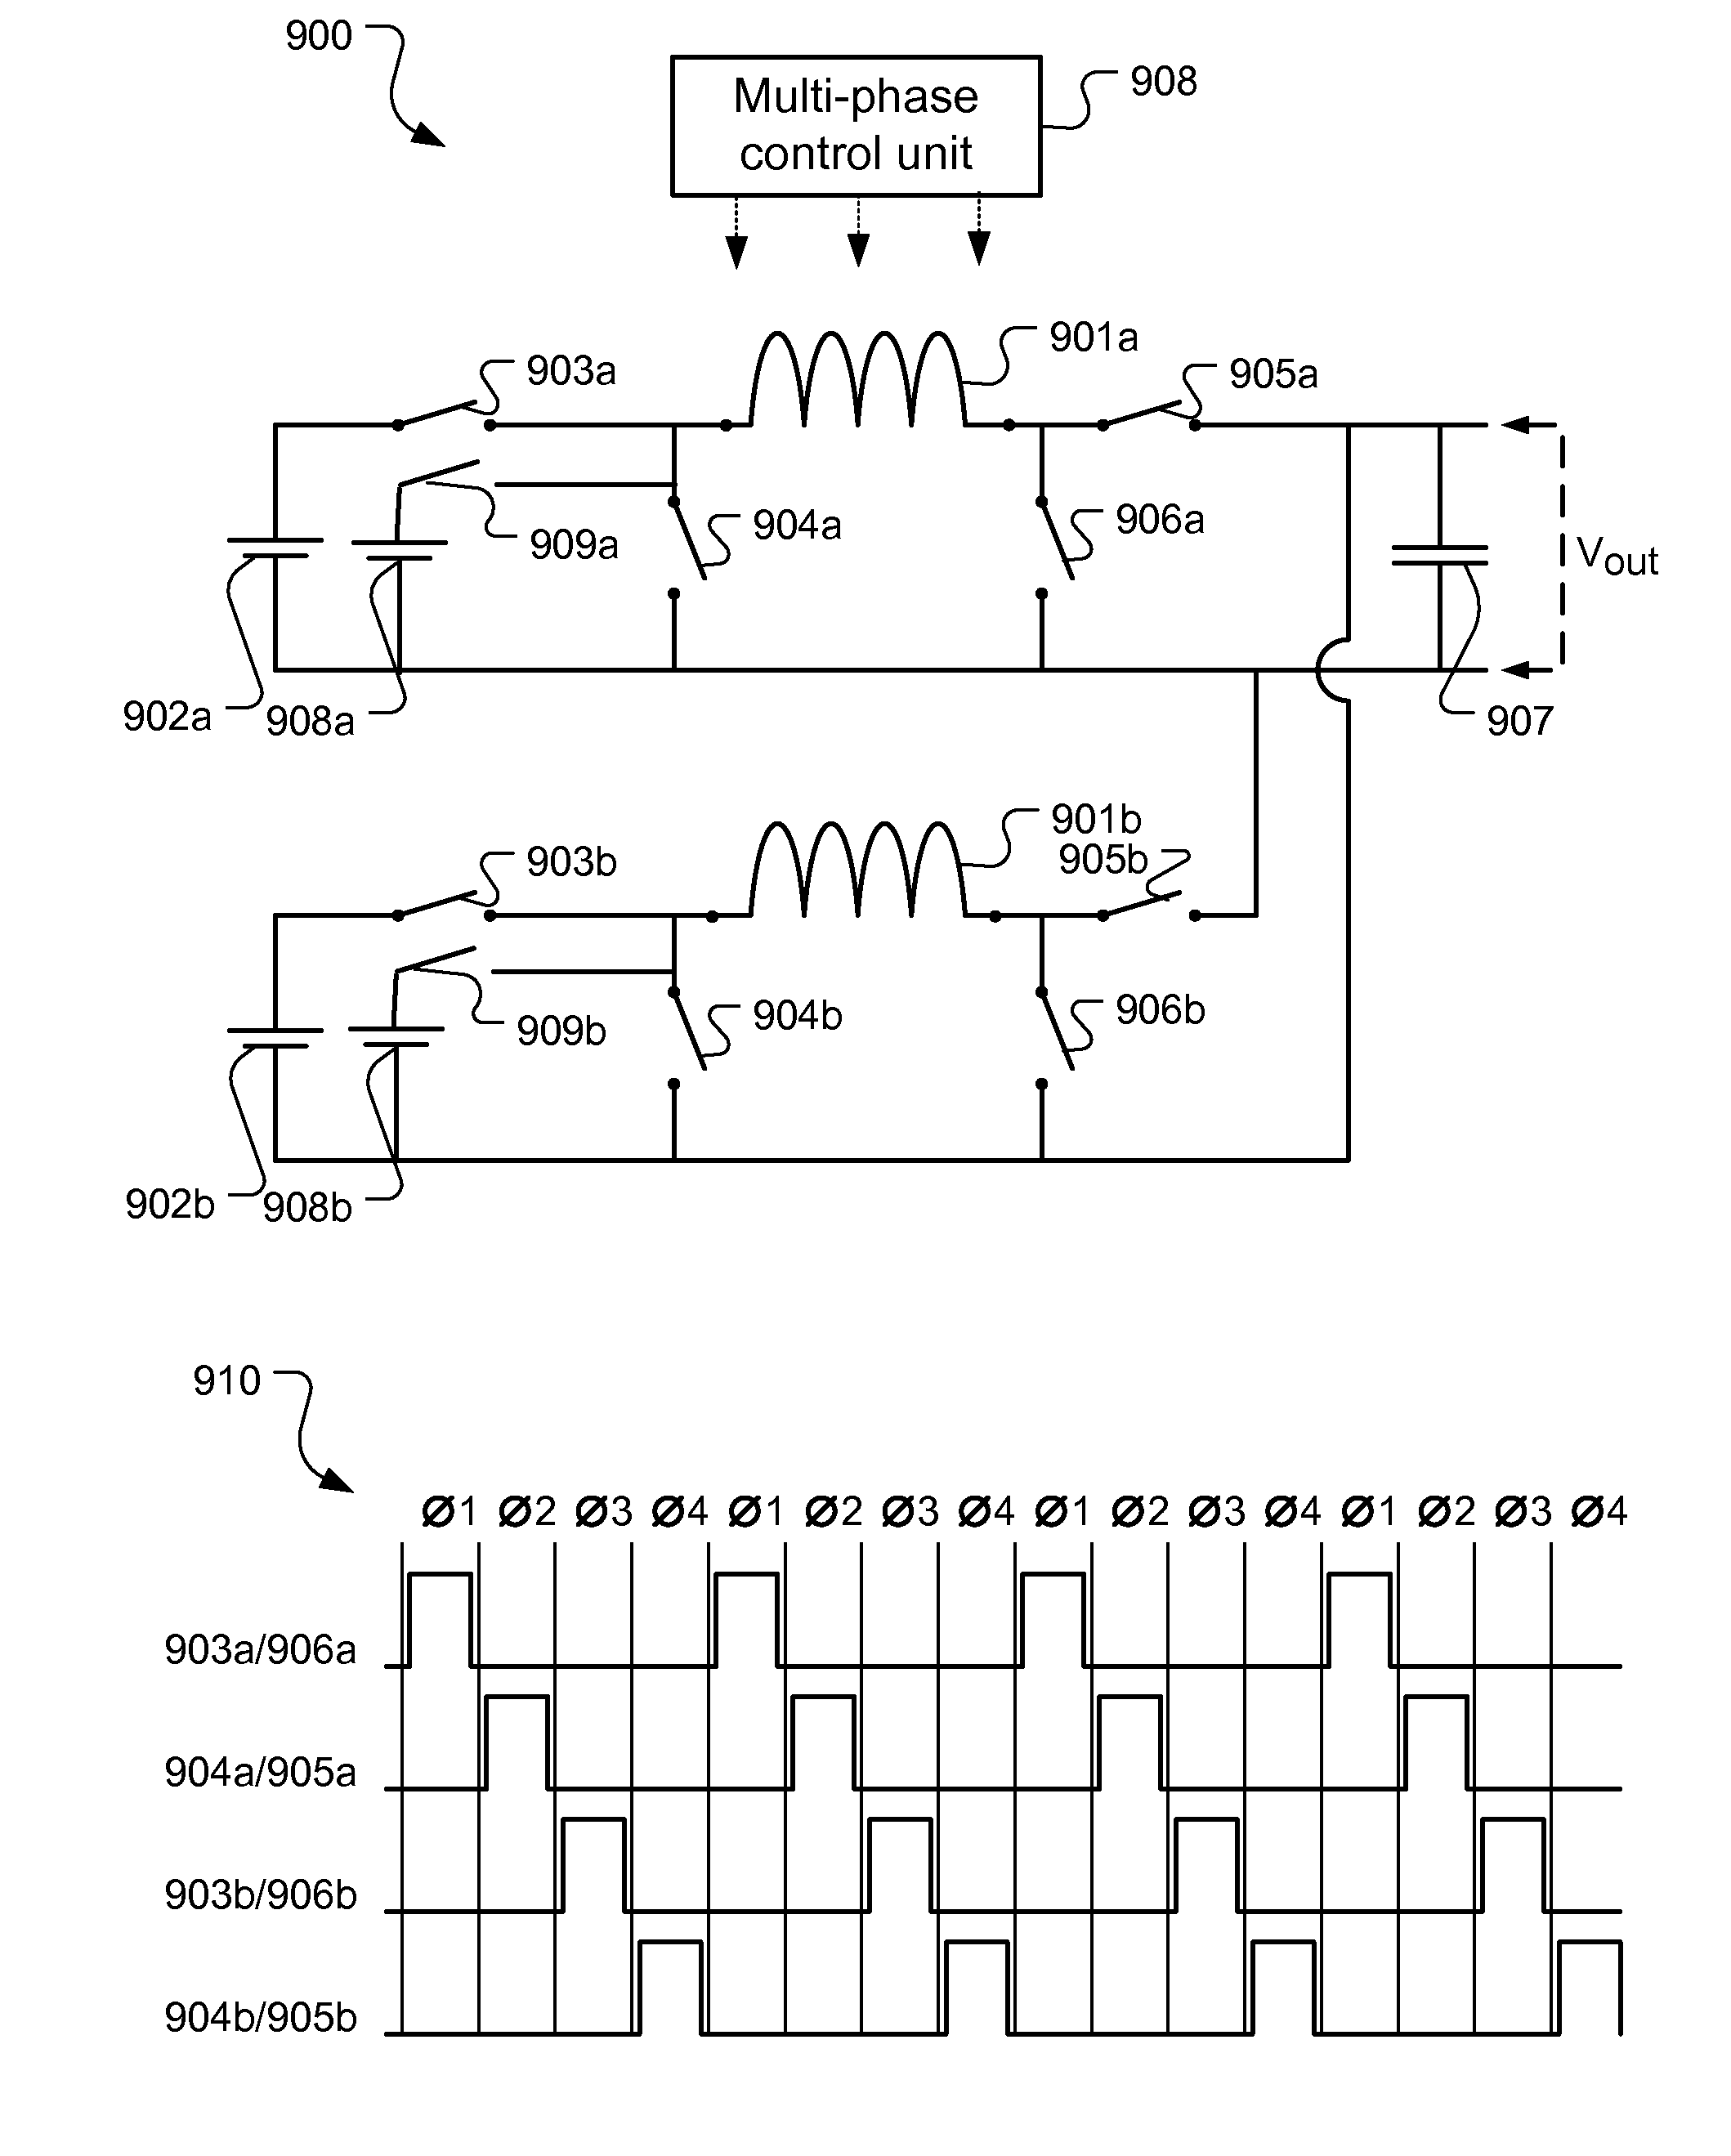 Battery-cell converter systems